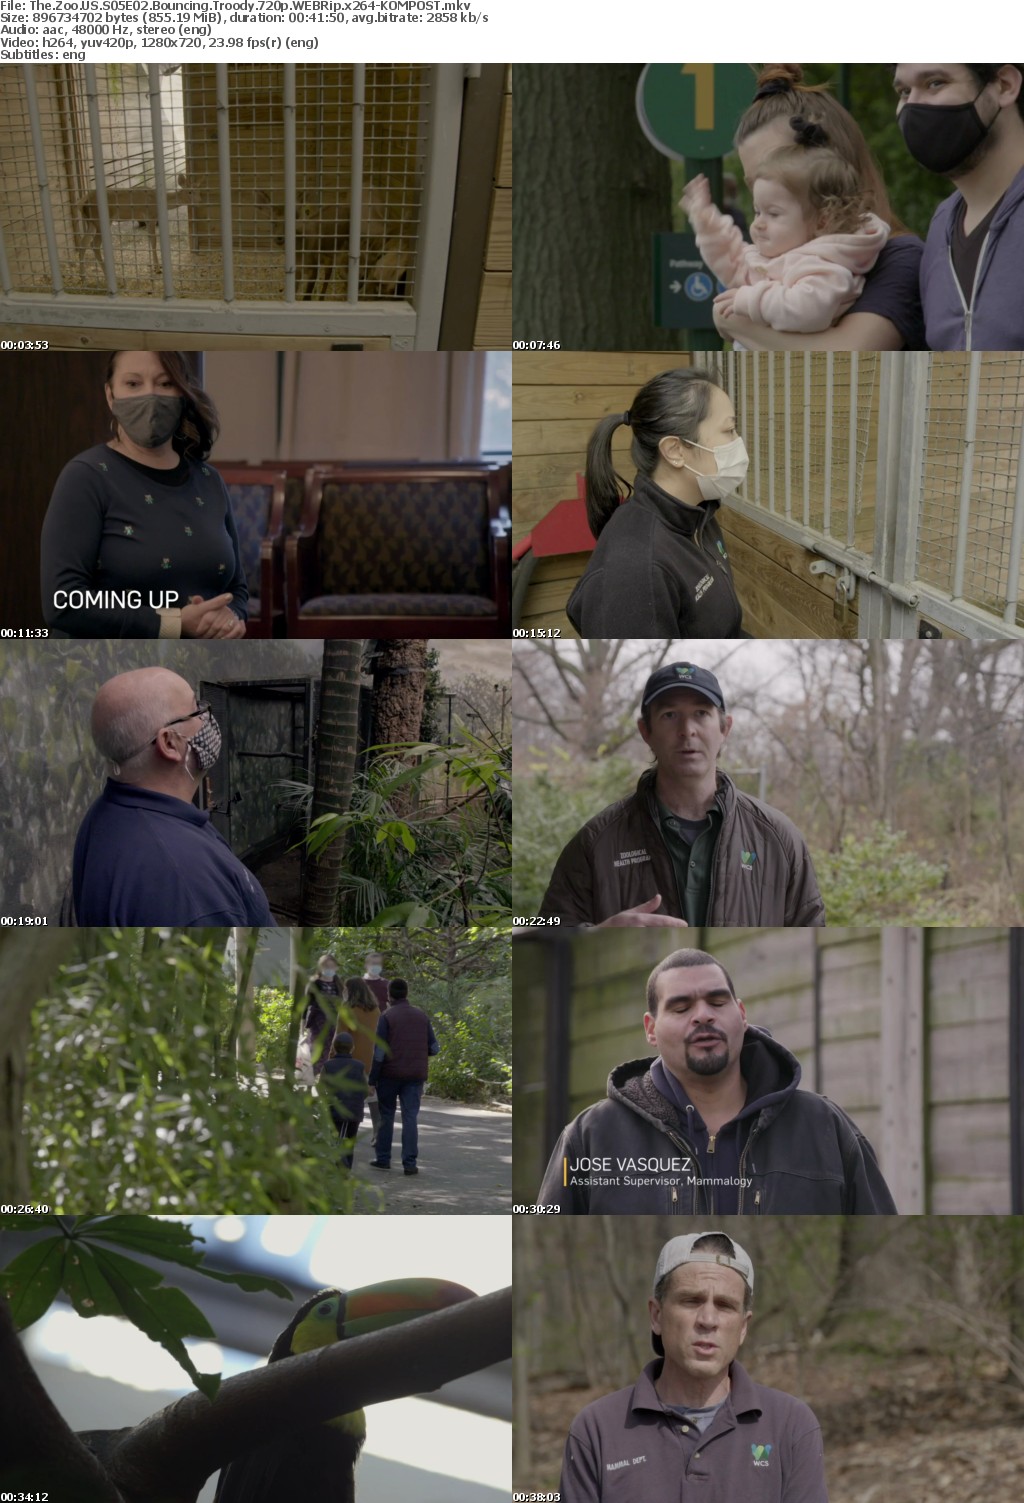 The Zoo US S05E02 Bouncing Troody 720p WEBRip x264-KOMPOST